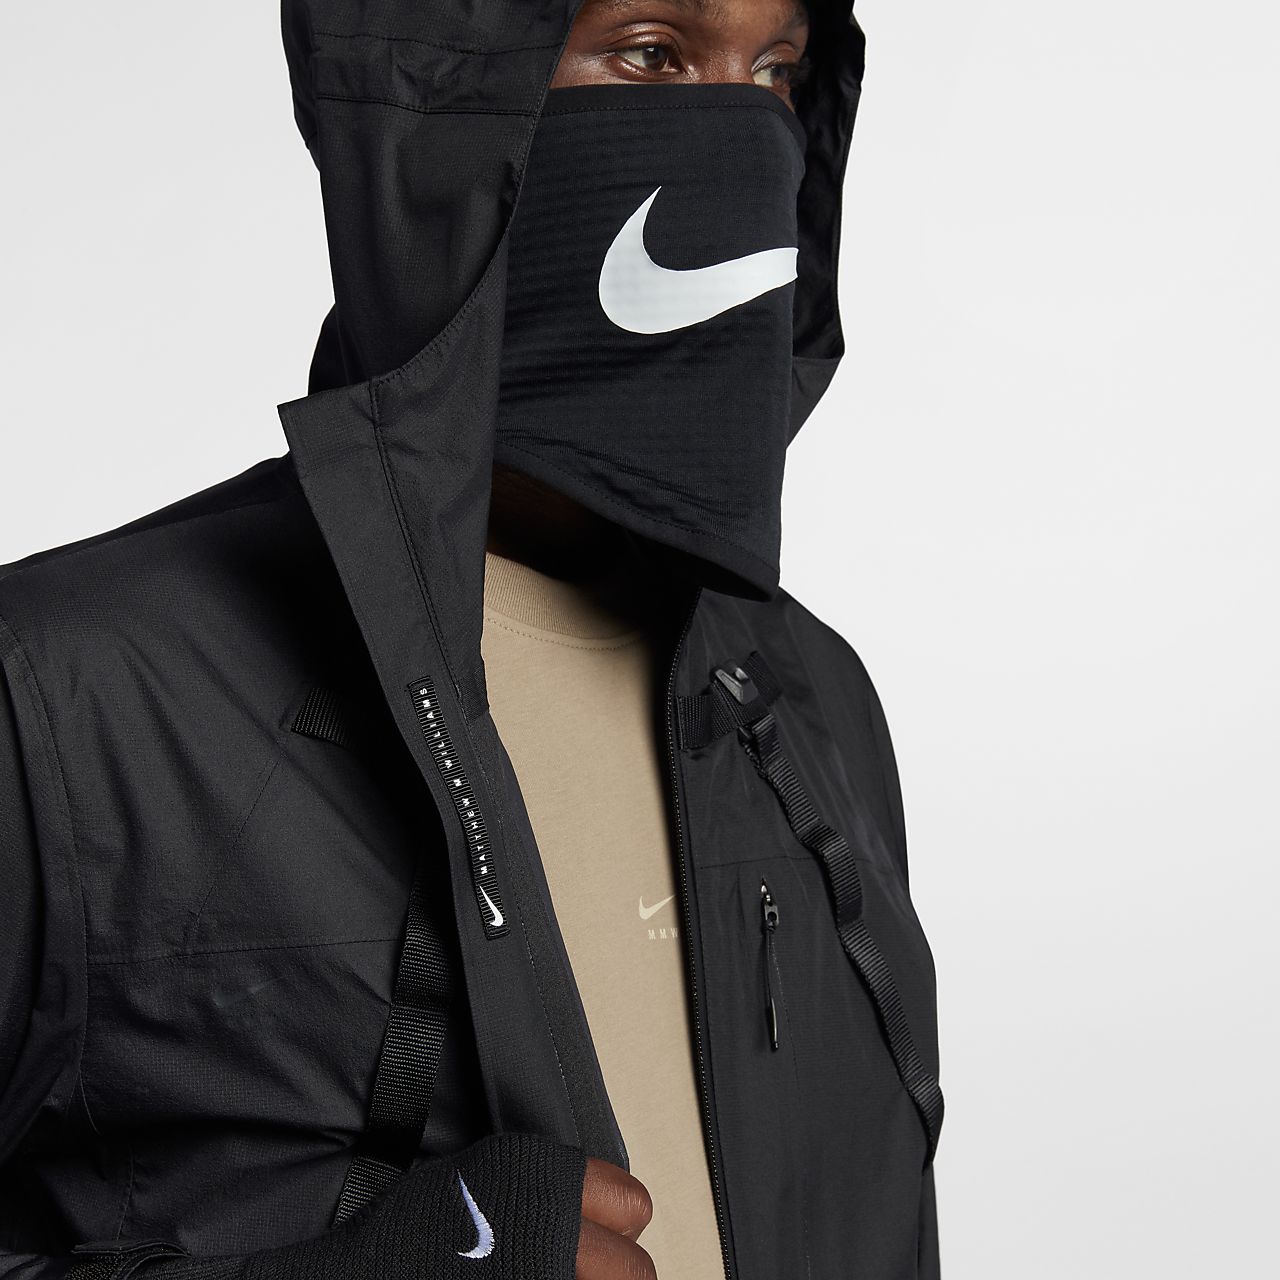 Nike Accused Of Targeting Gang Culture With Their New Balaclava (Ski ...